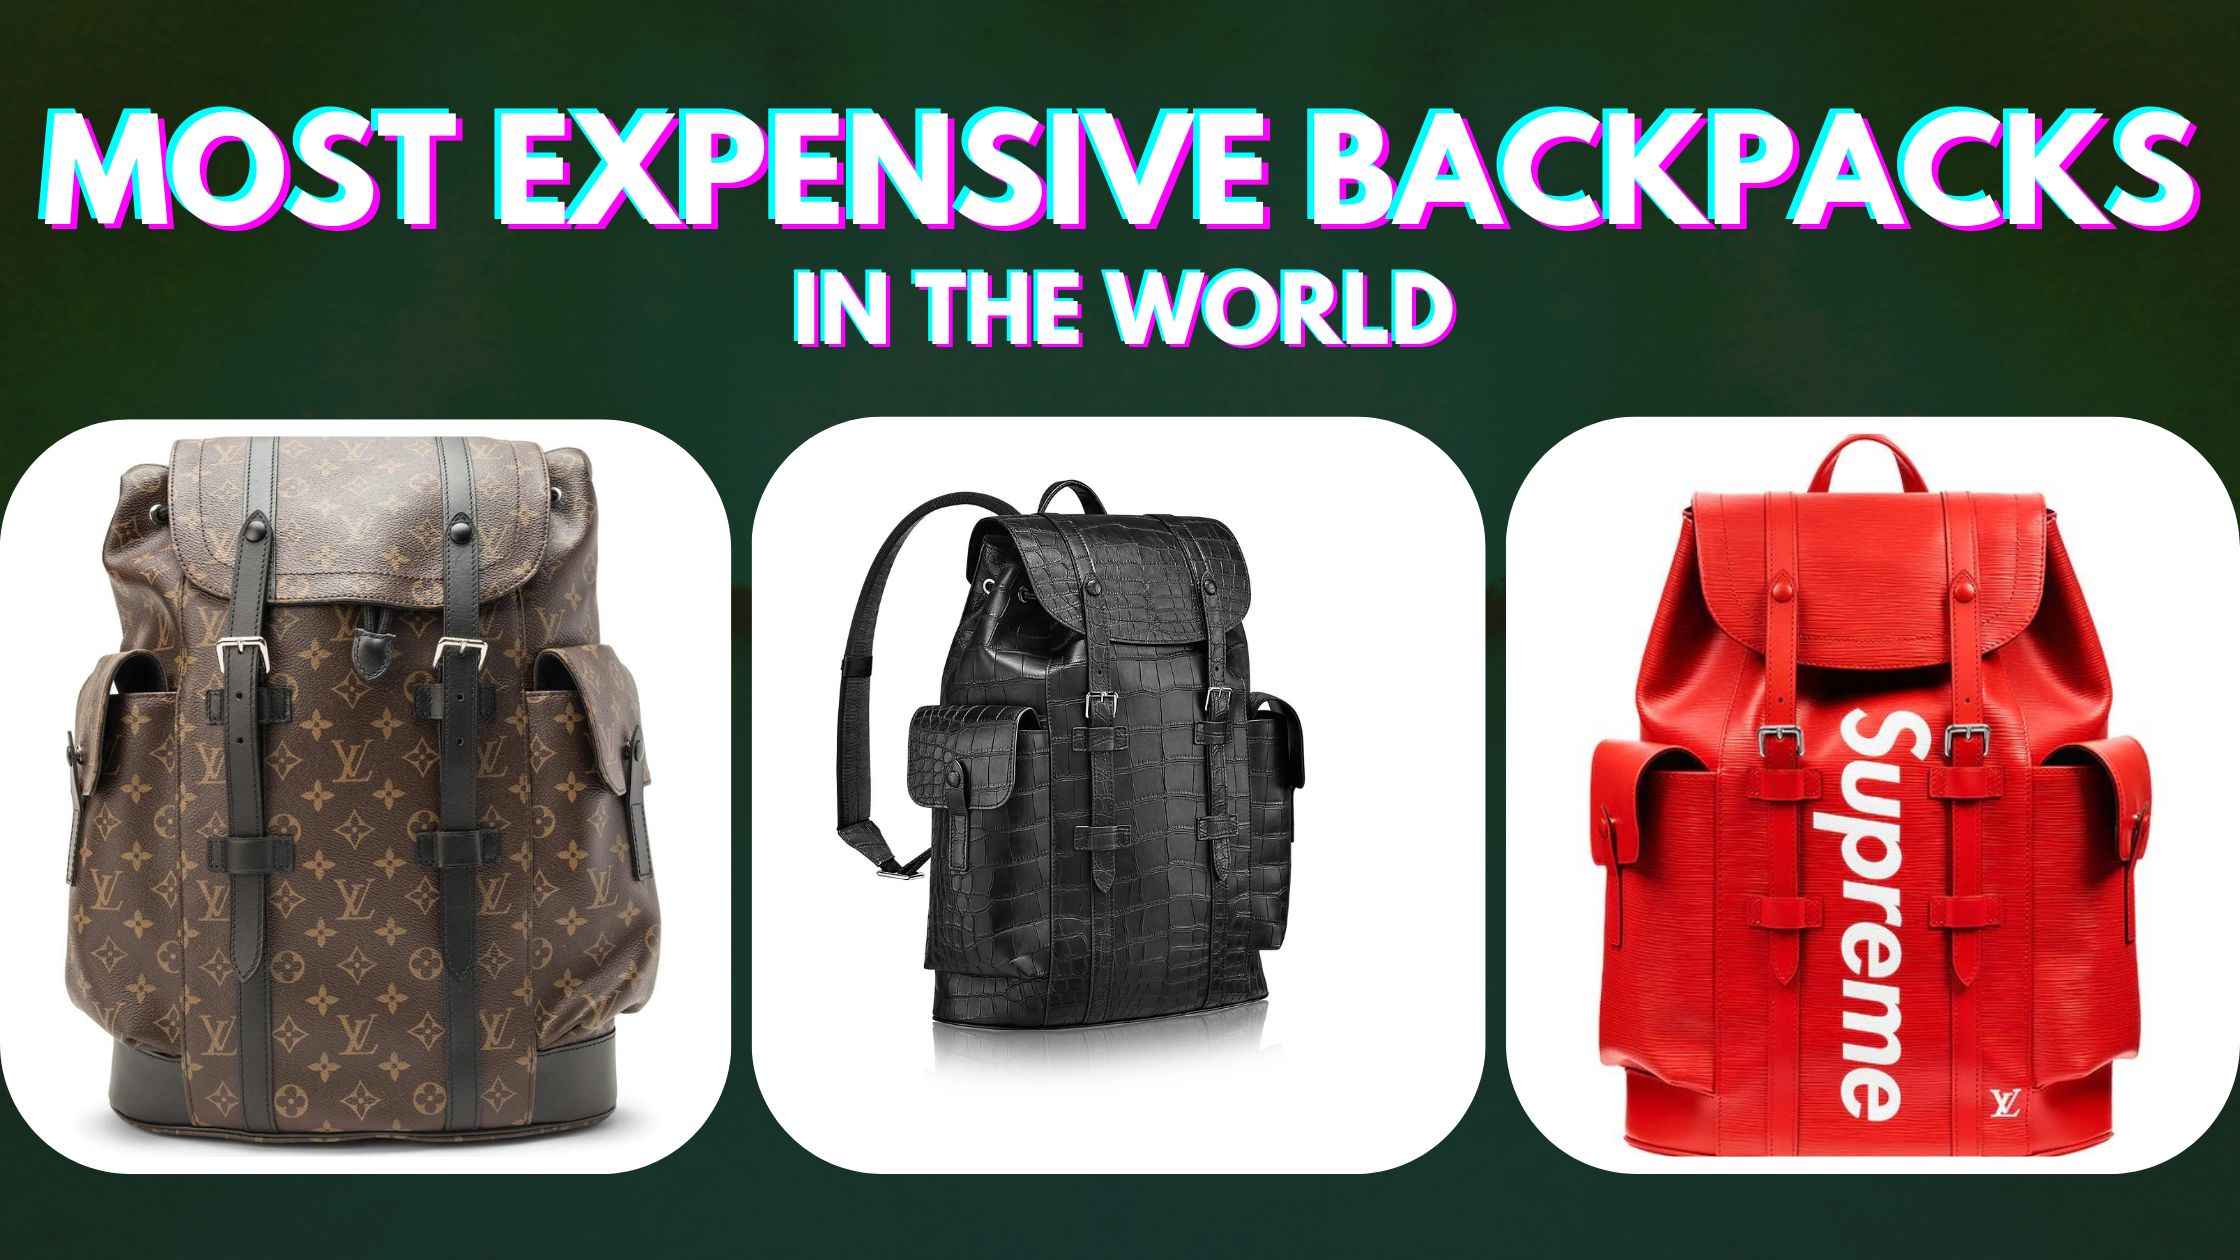 famous expensive backpacks